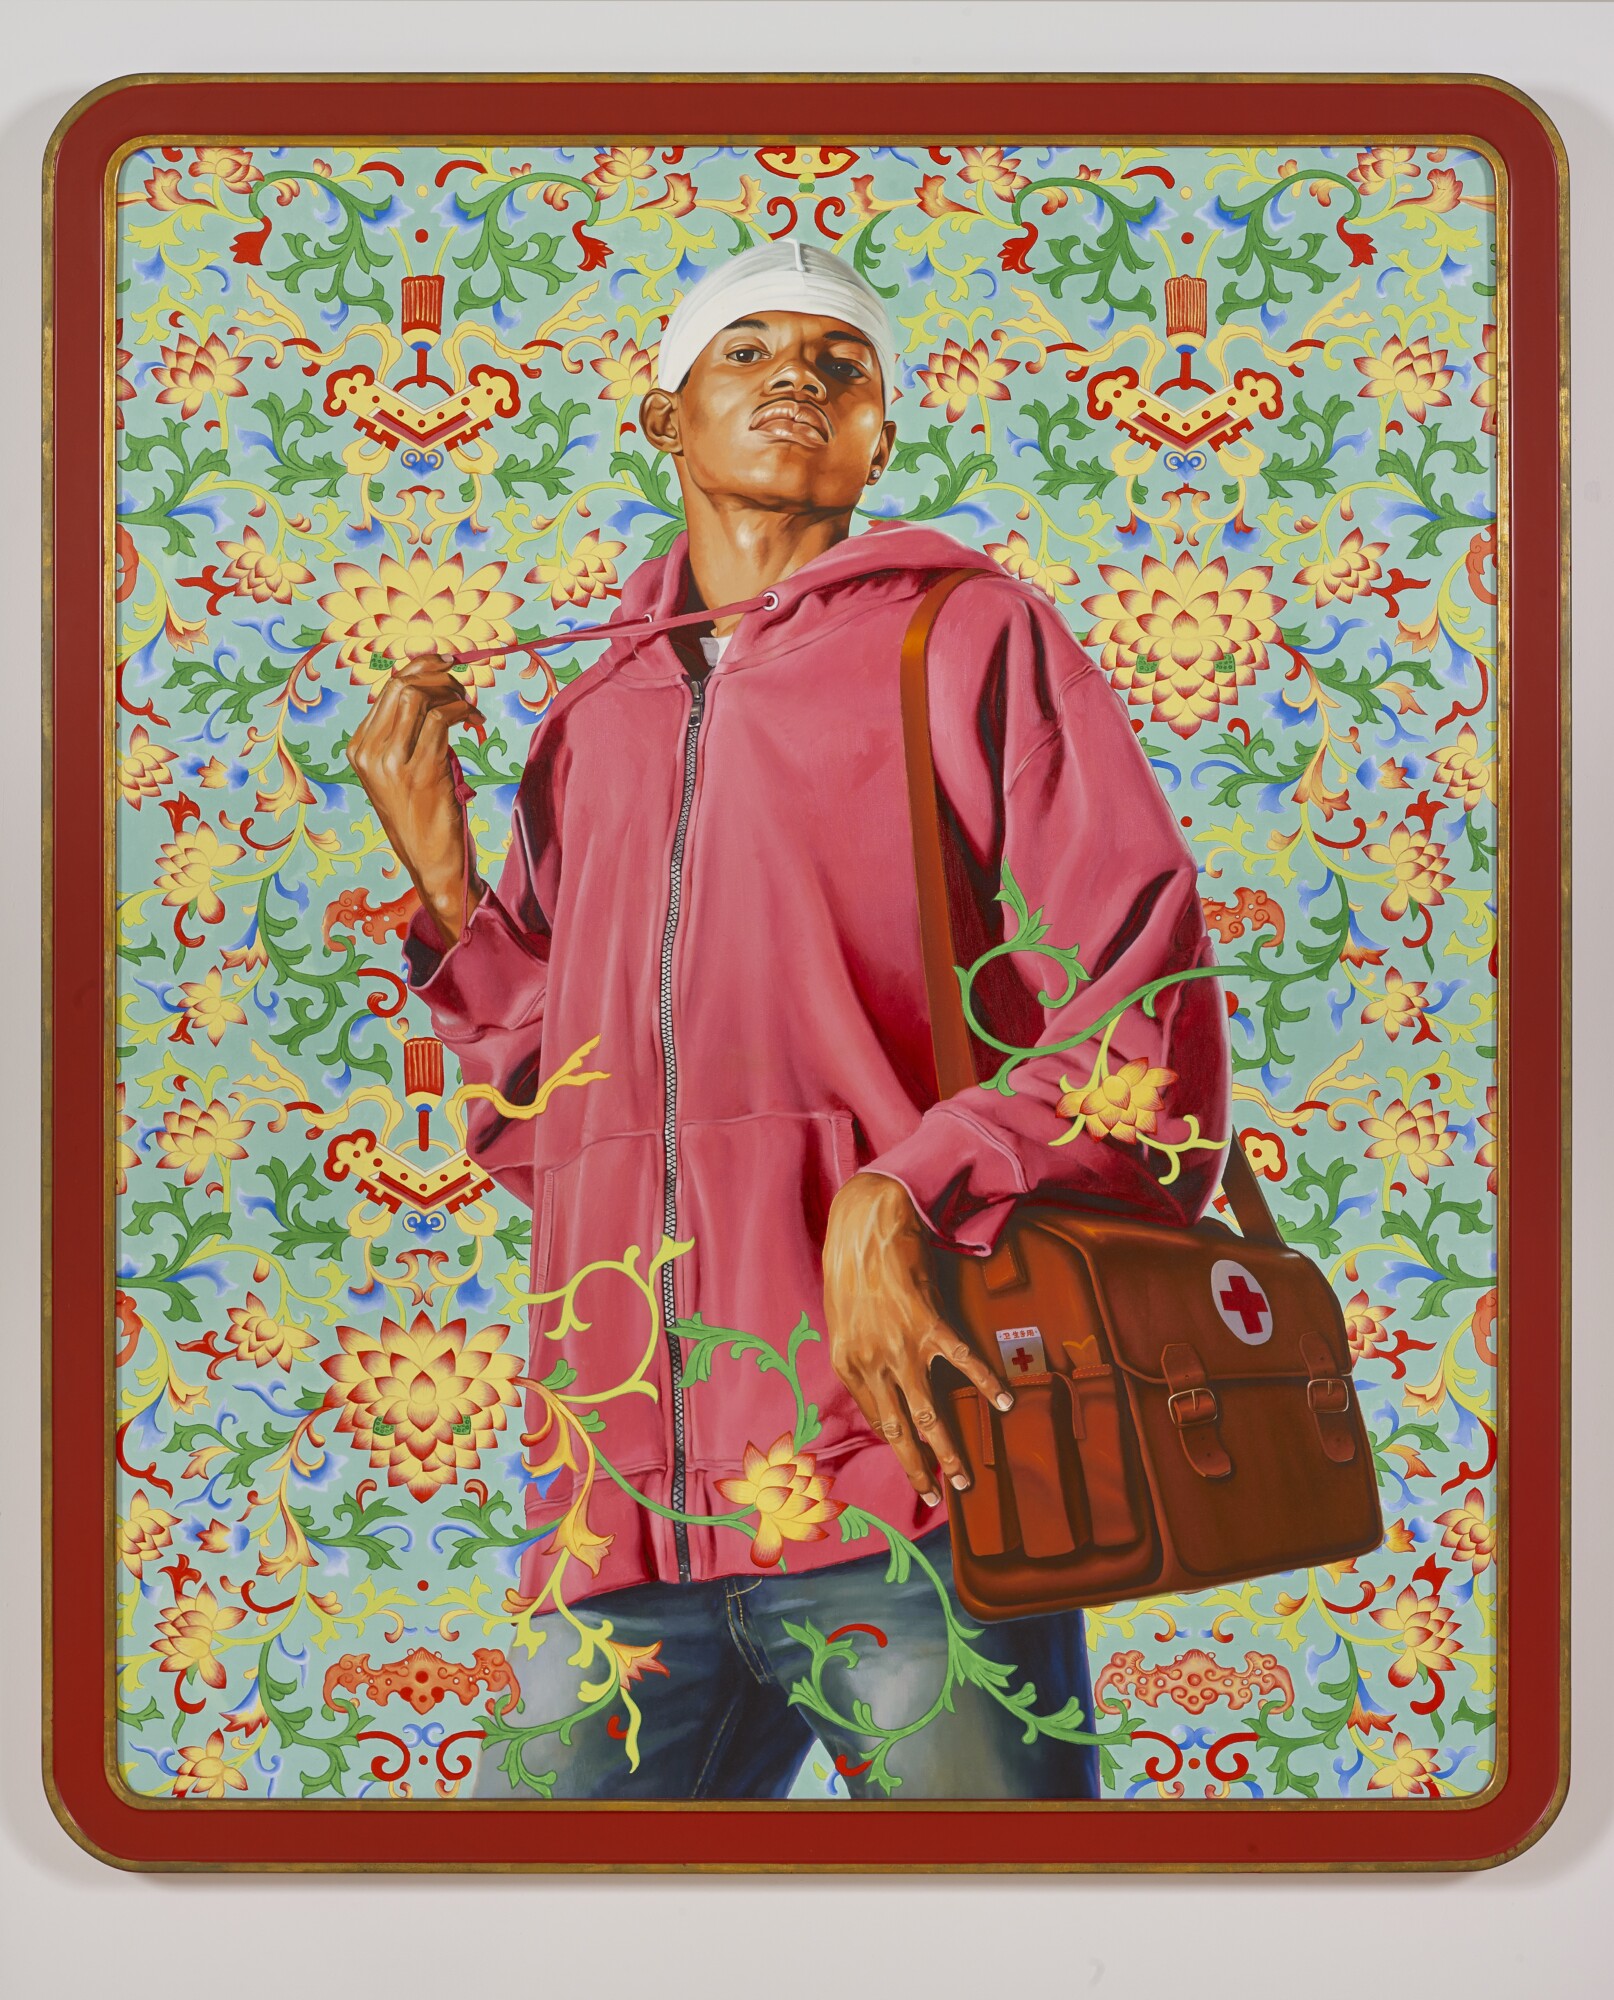 kehindewiley_world stage china_support the rural population and serve 500 million peasants